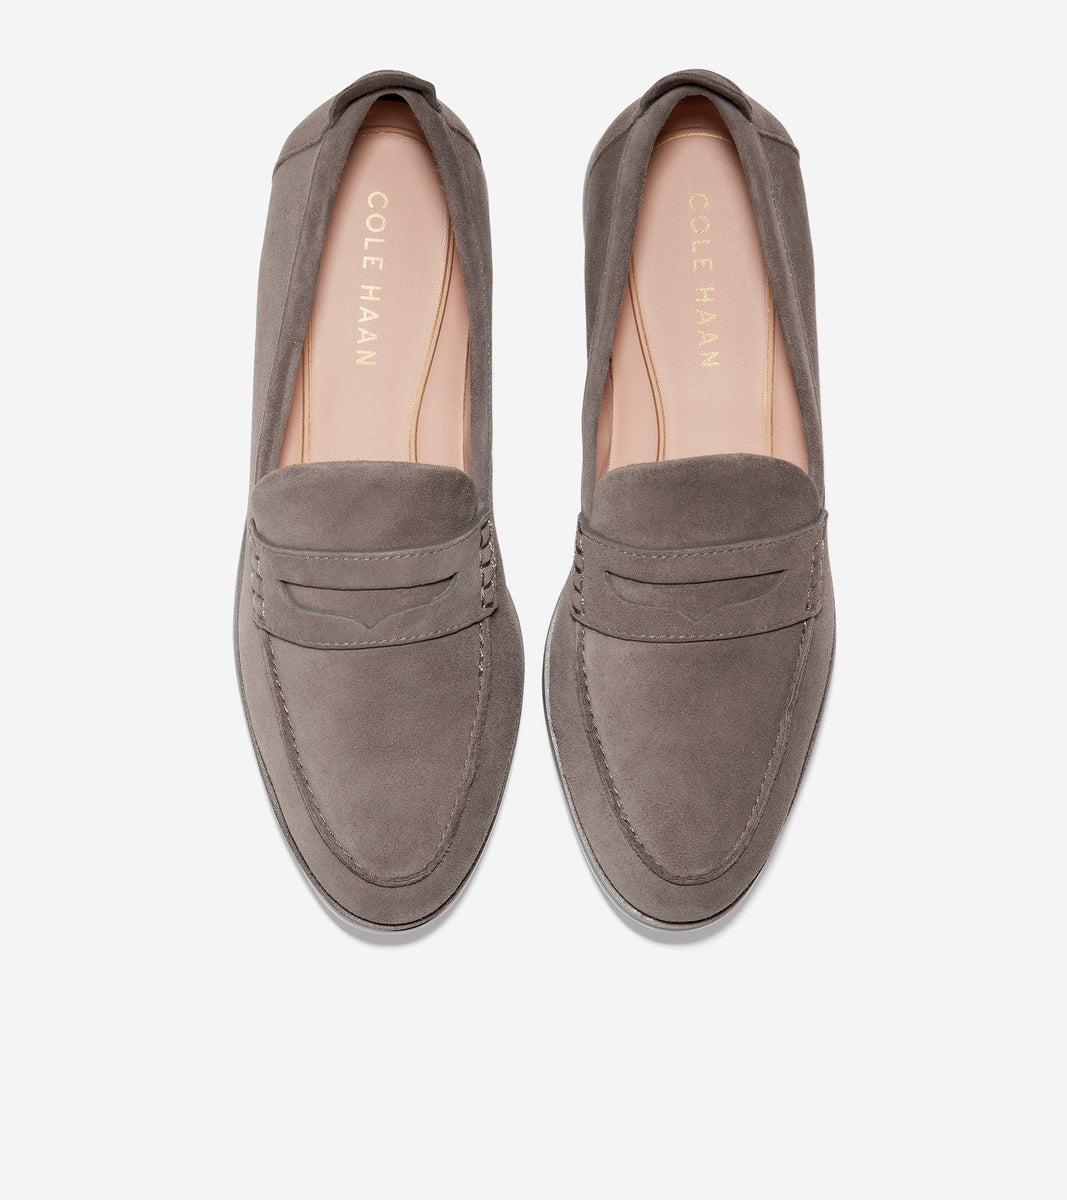 Grand Ambition Tolly Penny Loafer Women's